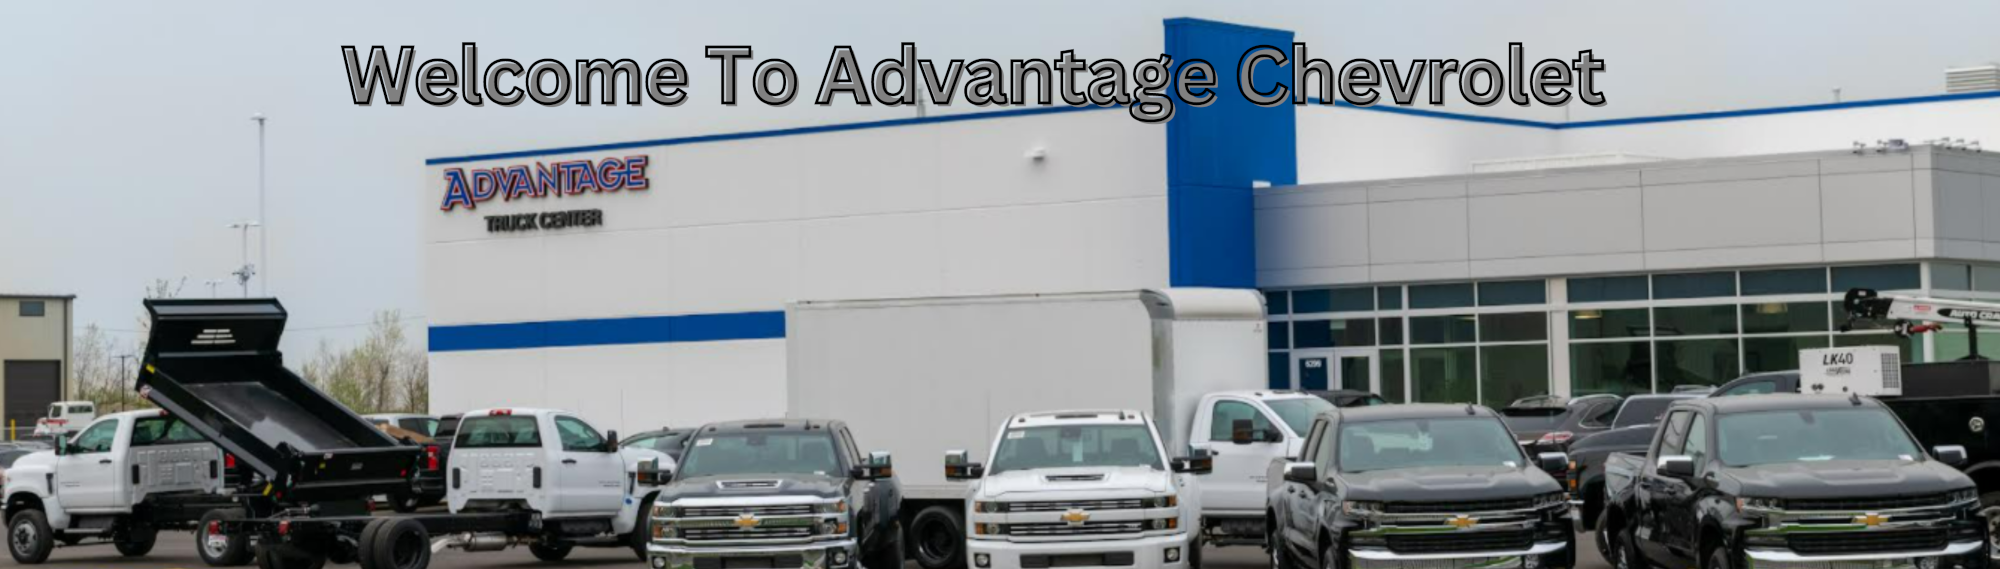 Welcome To Advantage Chevrolet overlayed on the dealership facade